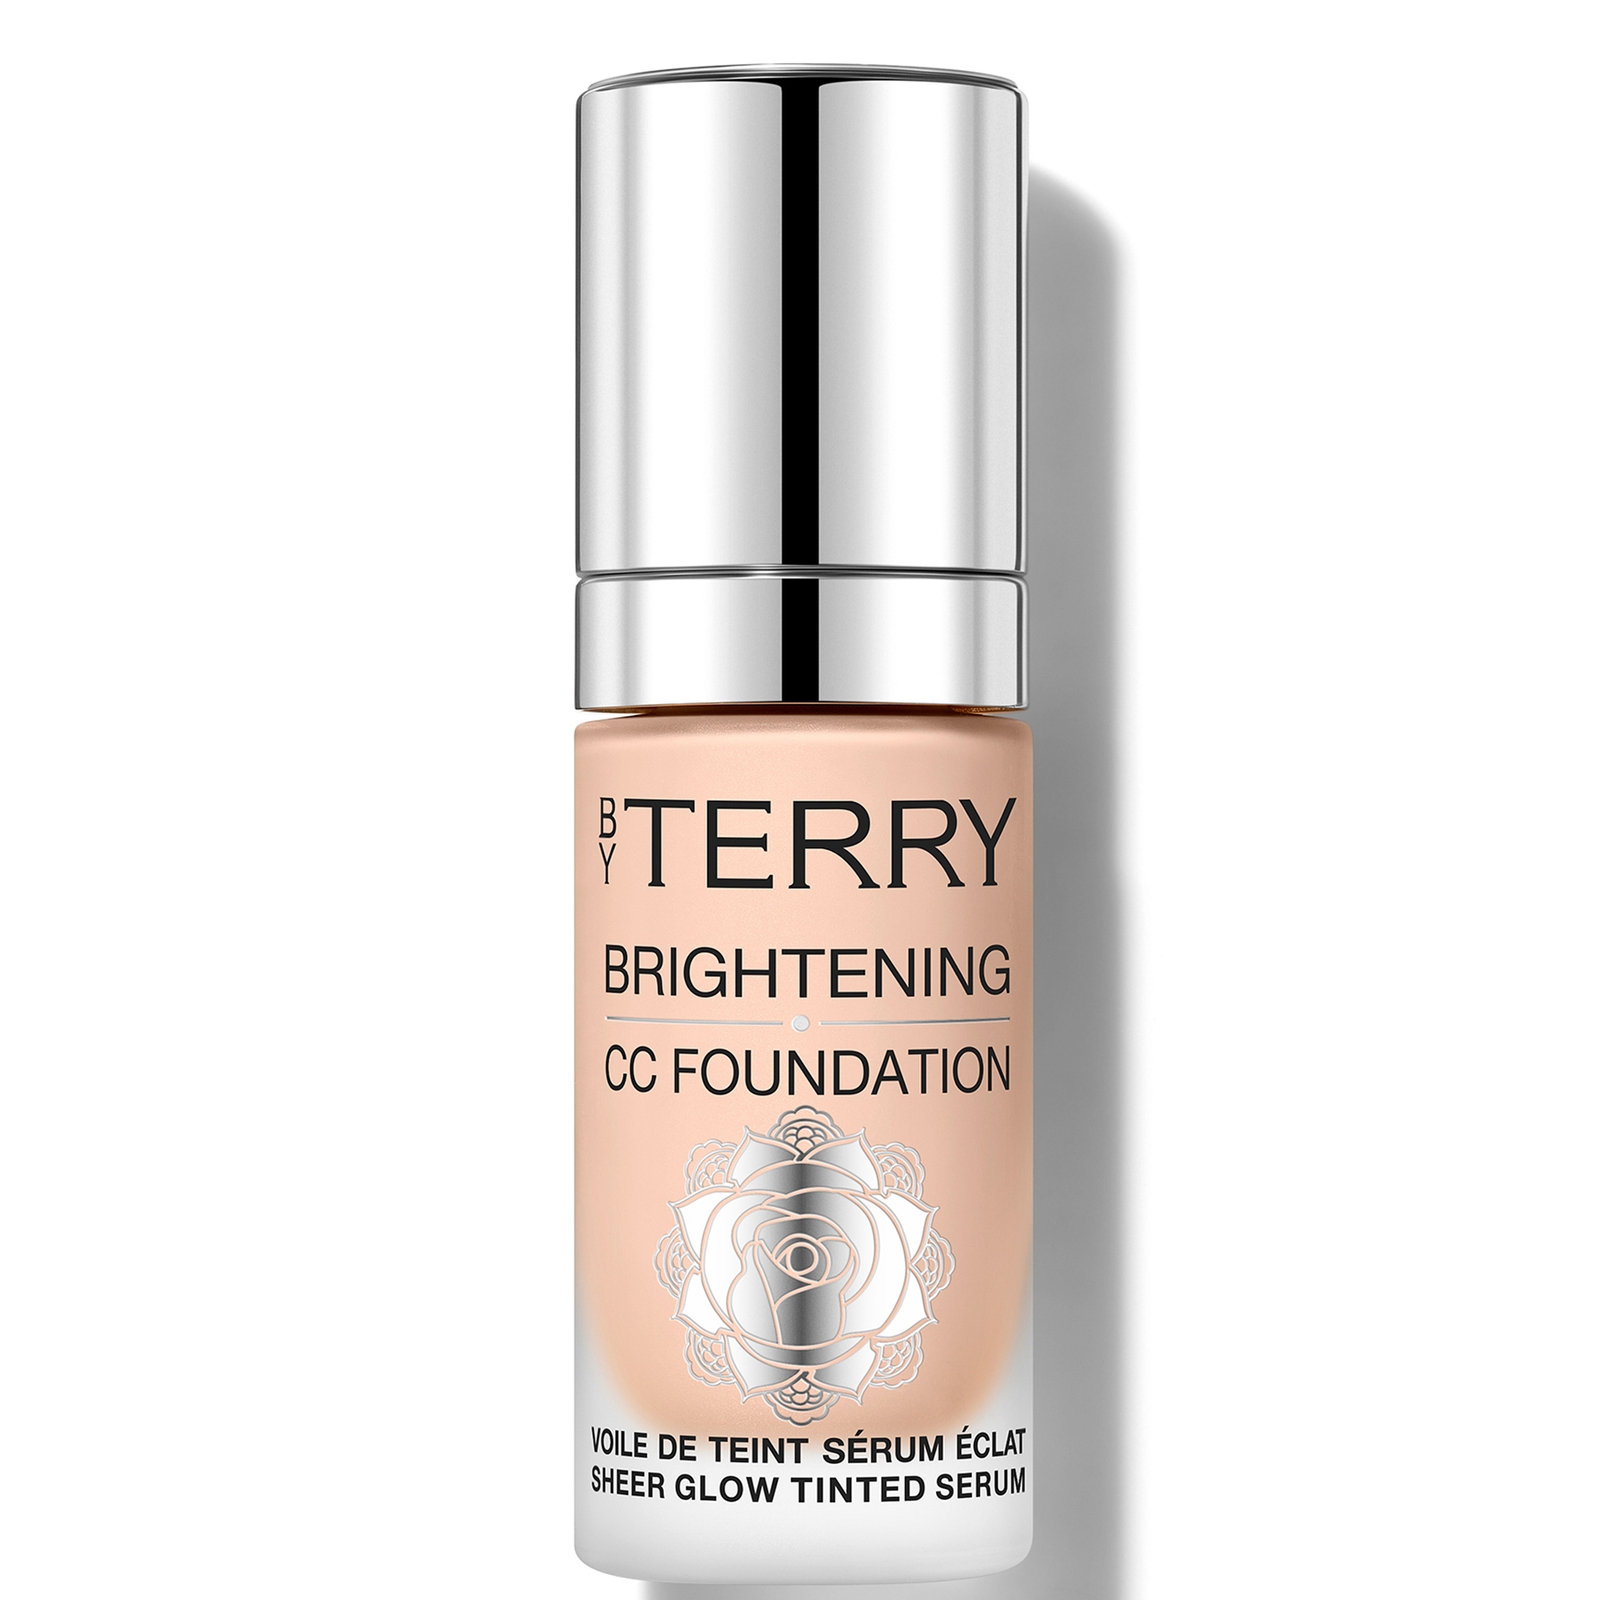 Image of By Terry Brightening CC Foundation 30ml (Various Shades) - 2C - LIGHT COOL